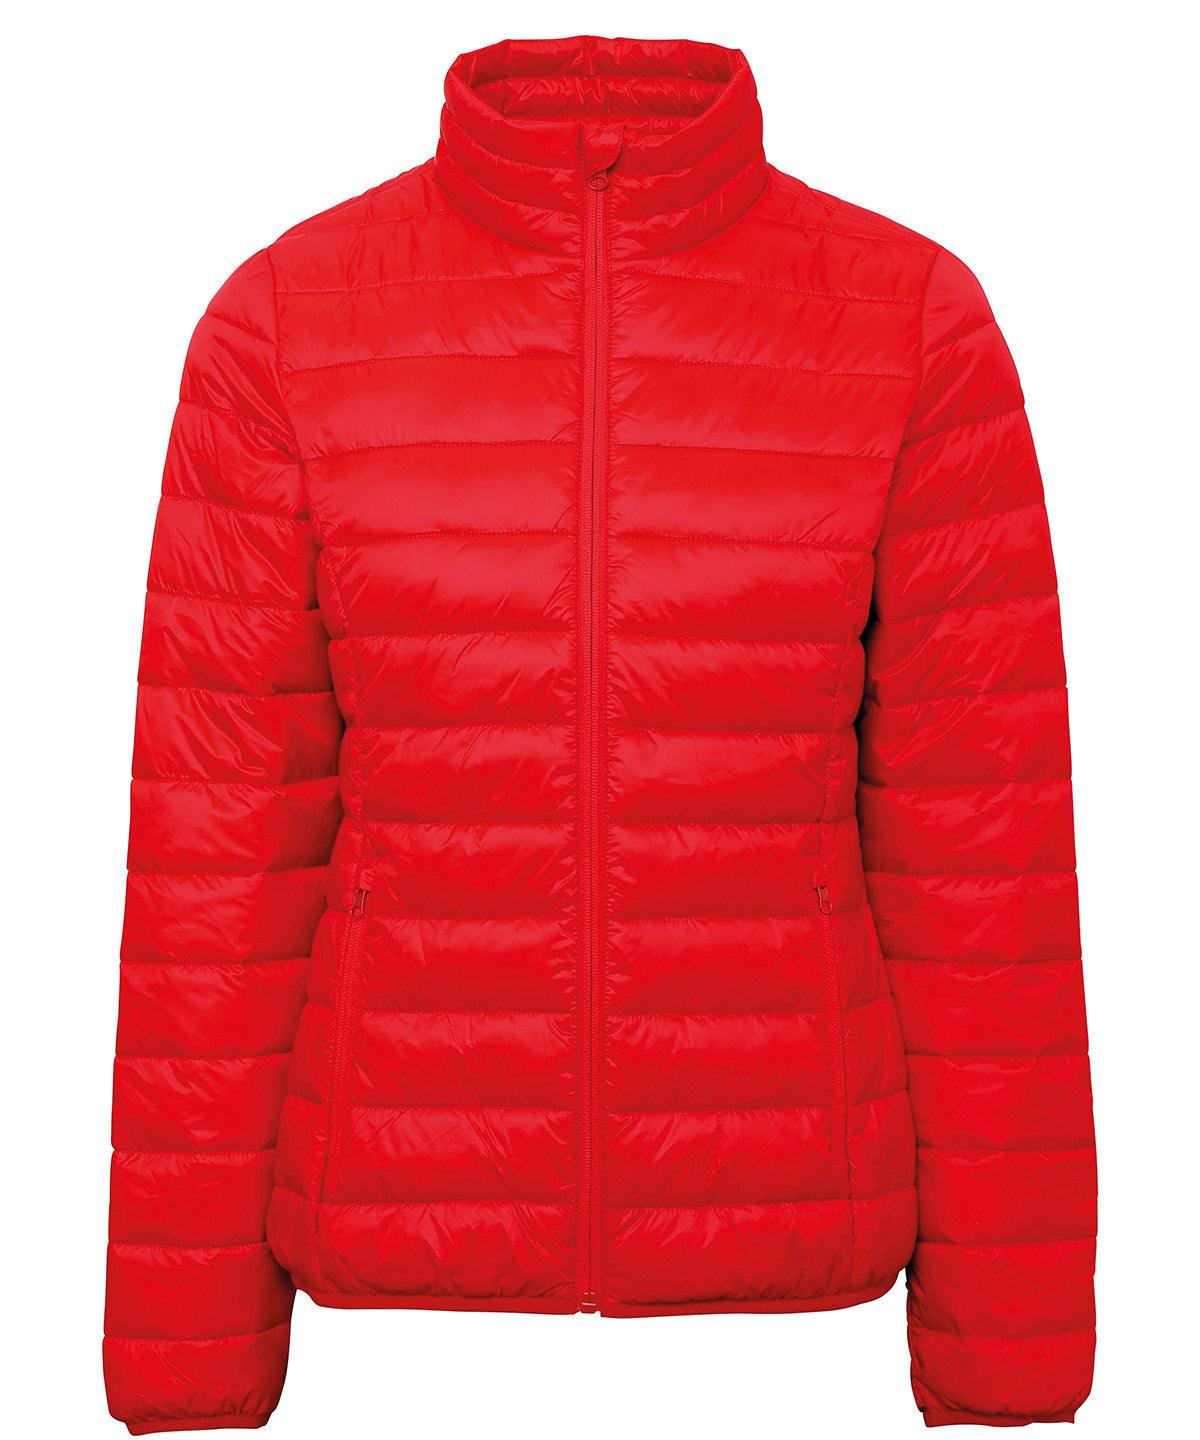 Red - Women's terrain padded jacket Jackets 2786 Jackets & Coats, Must Haves, Padded & Insulation, Padded Perfection, Women's Fashion Schoolwear Centres